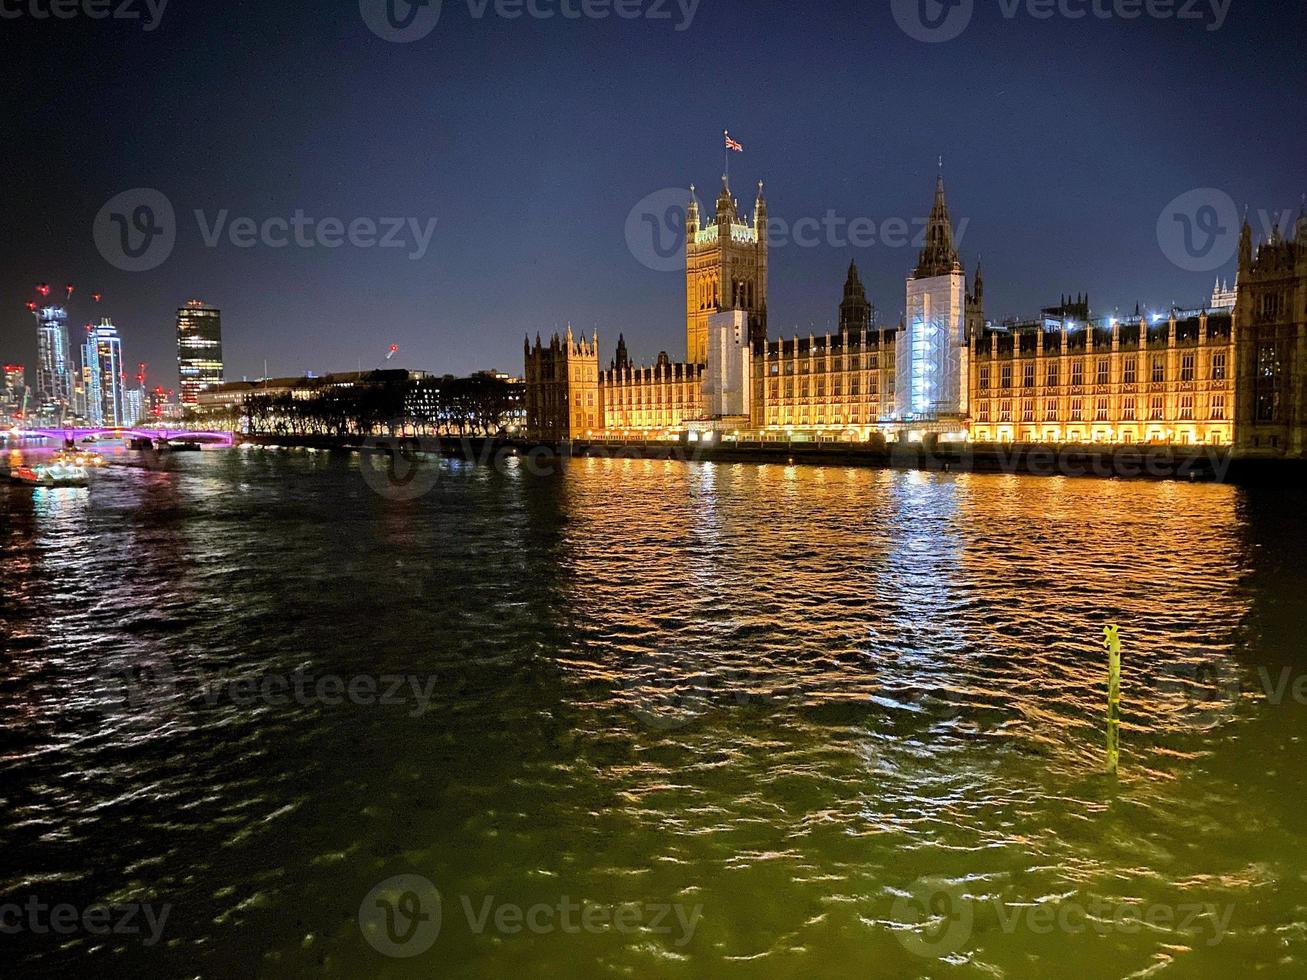 A view of the Houses of Parliament in London at night photo